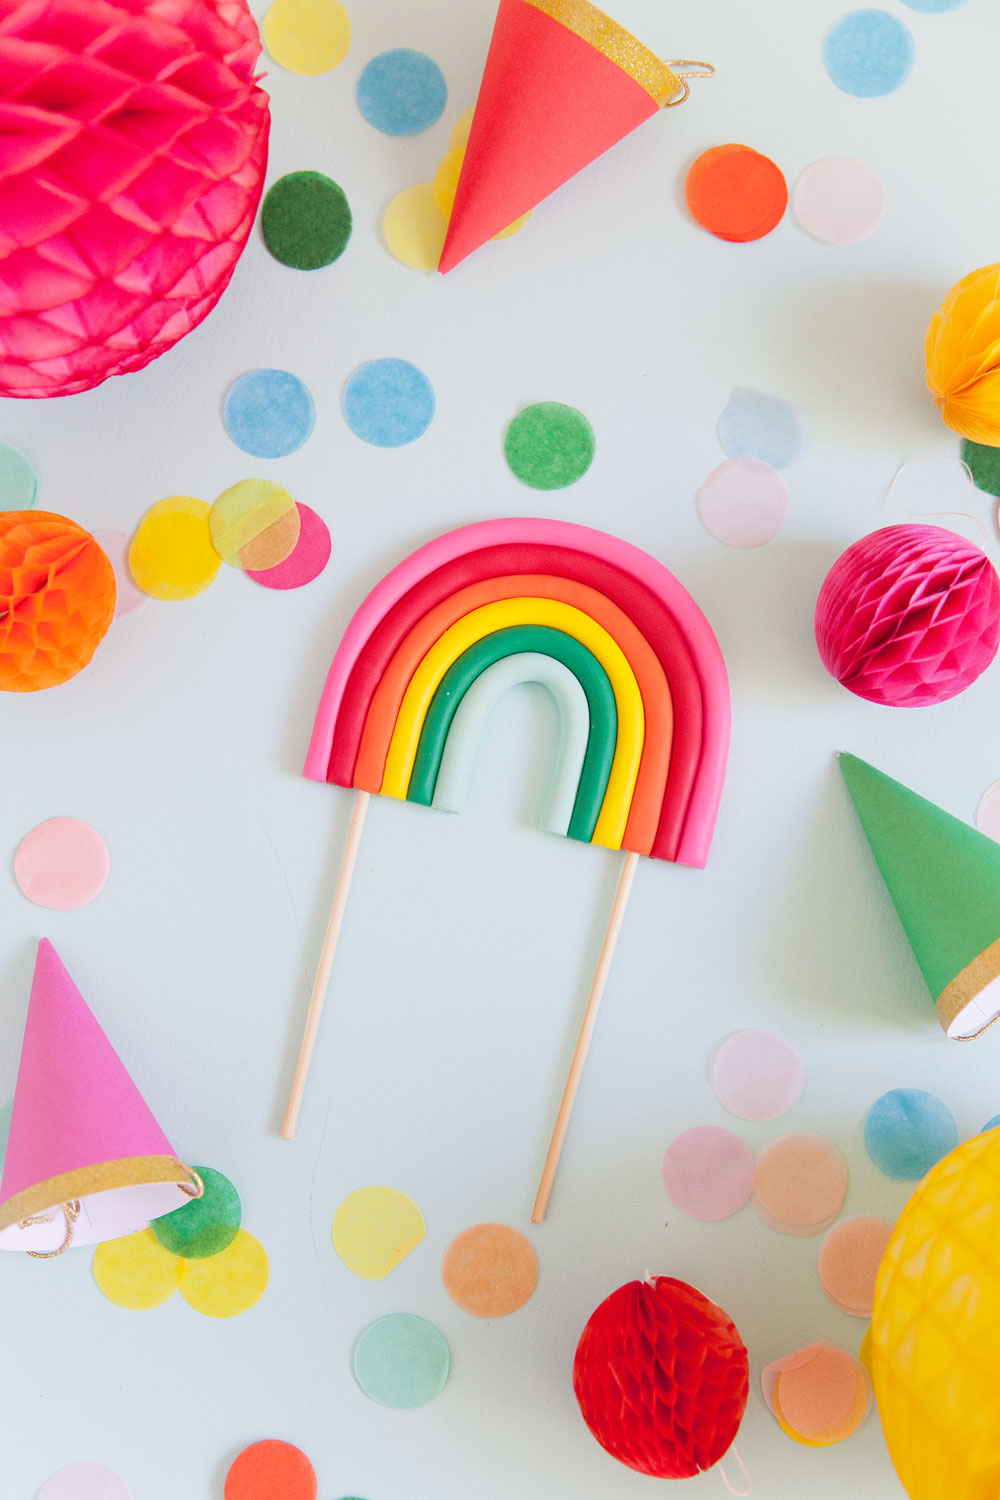 Make this cute DIY rainbow cake topper in a few simple steps. Perfect for any rainbow or unicorn themed birthday parties